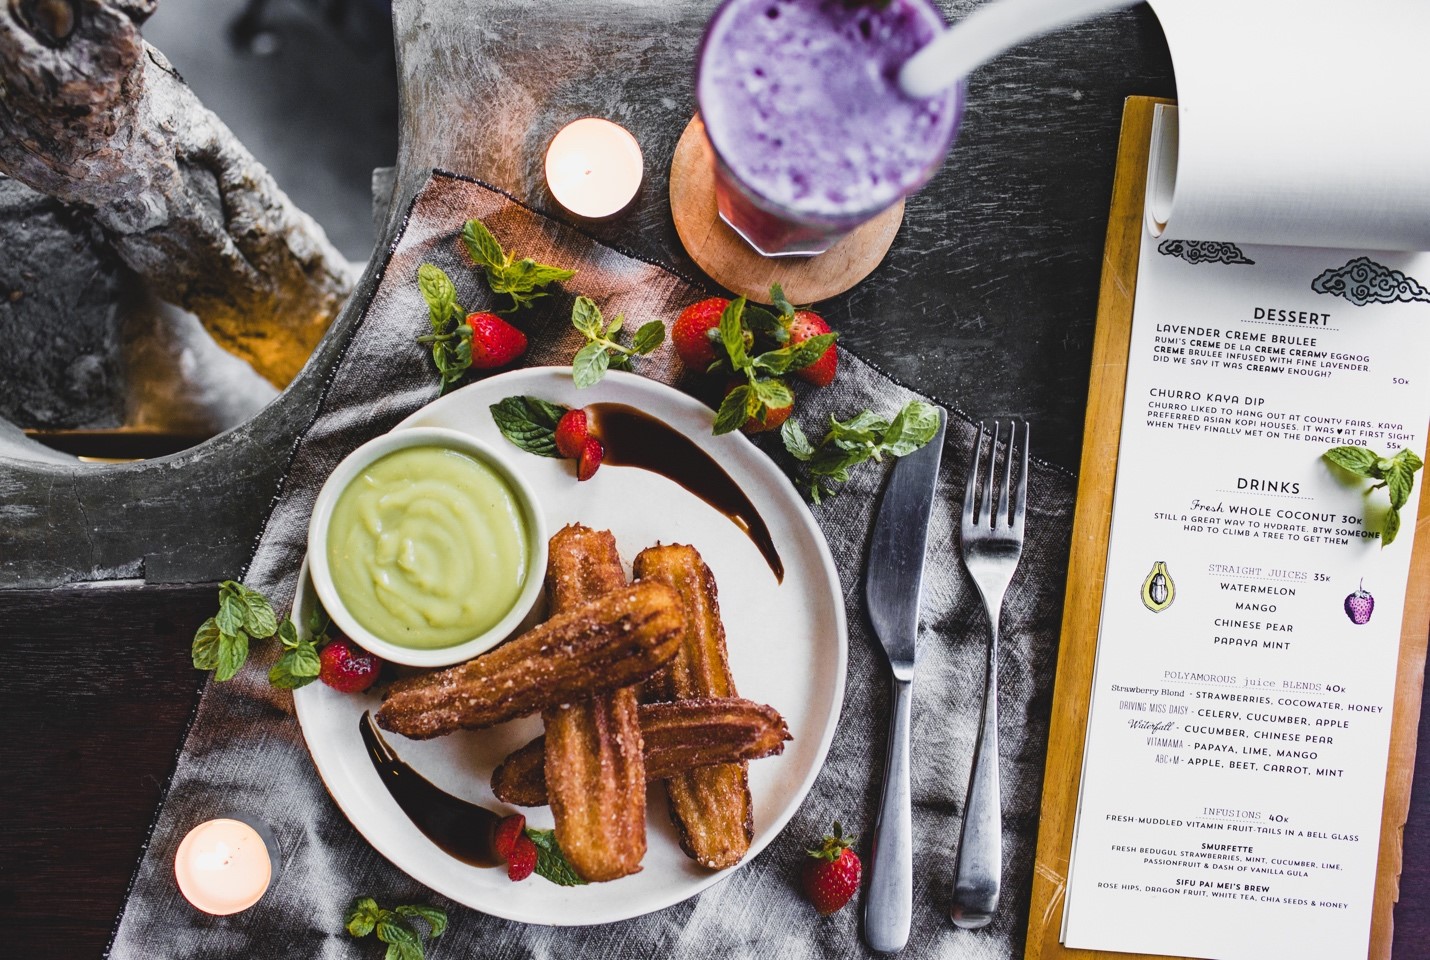 3 Tips on How to Get More Creative with Your Restaurant Menu